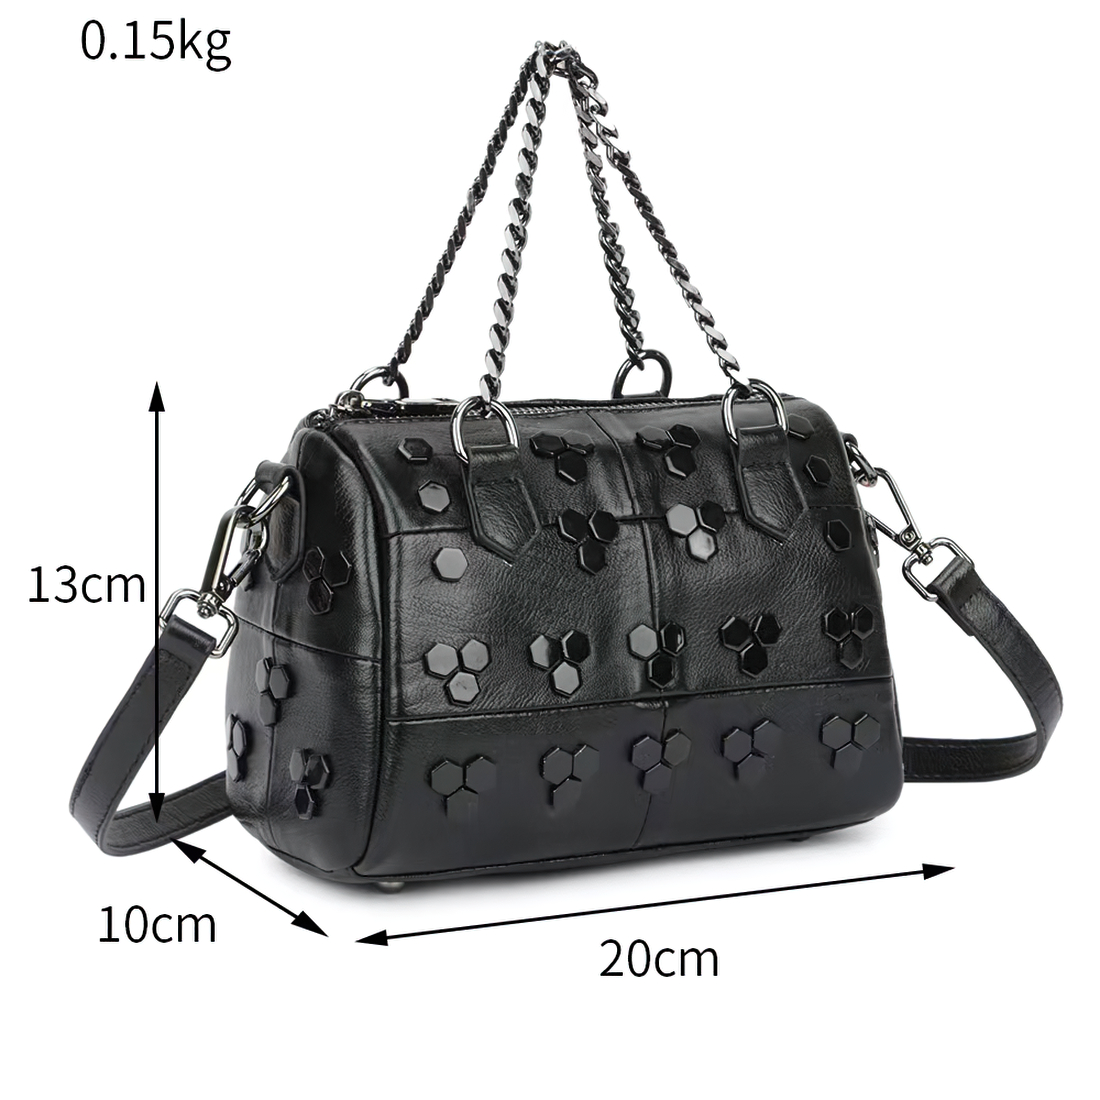 Punk Women's Bag with Rivets / Fashion Patchwork Handbag with Chain - HARD'N'HEAVY